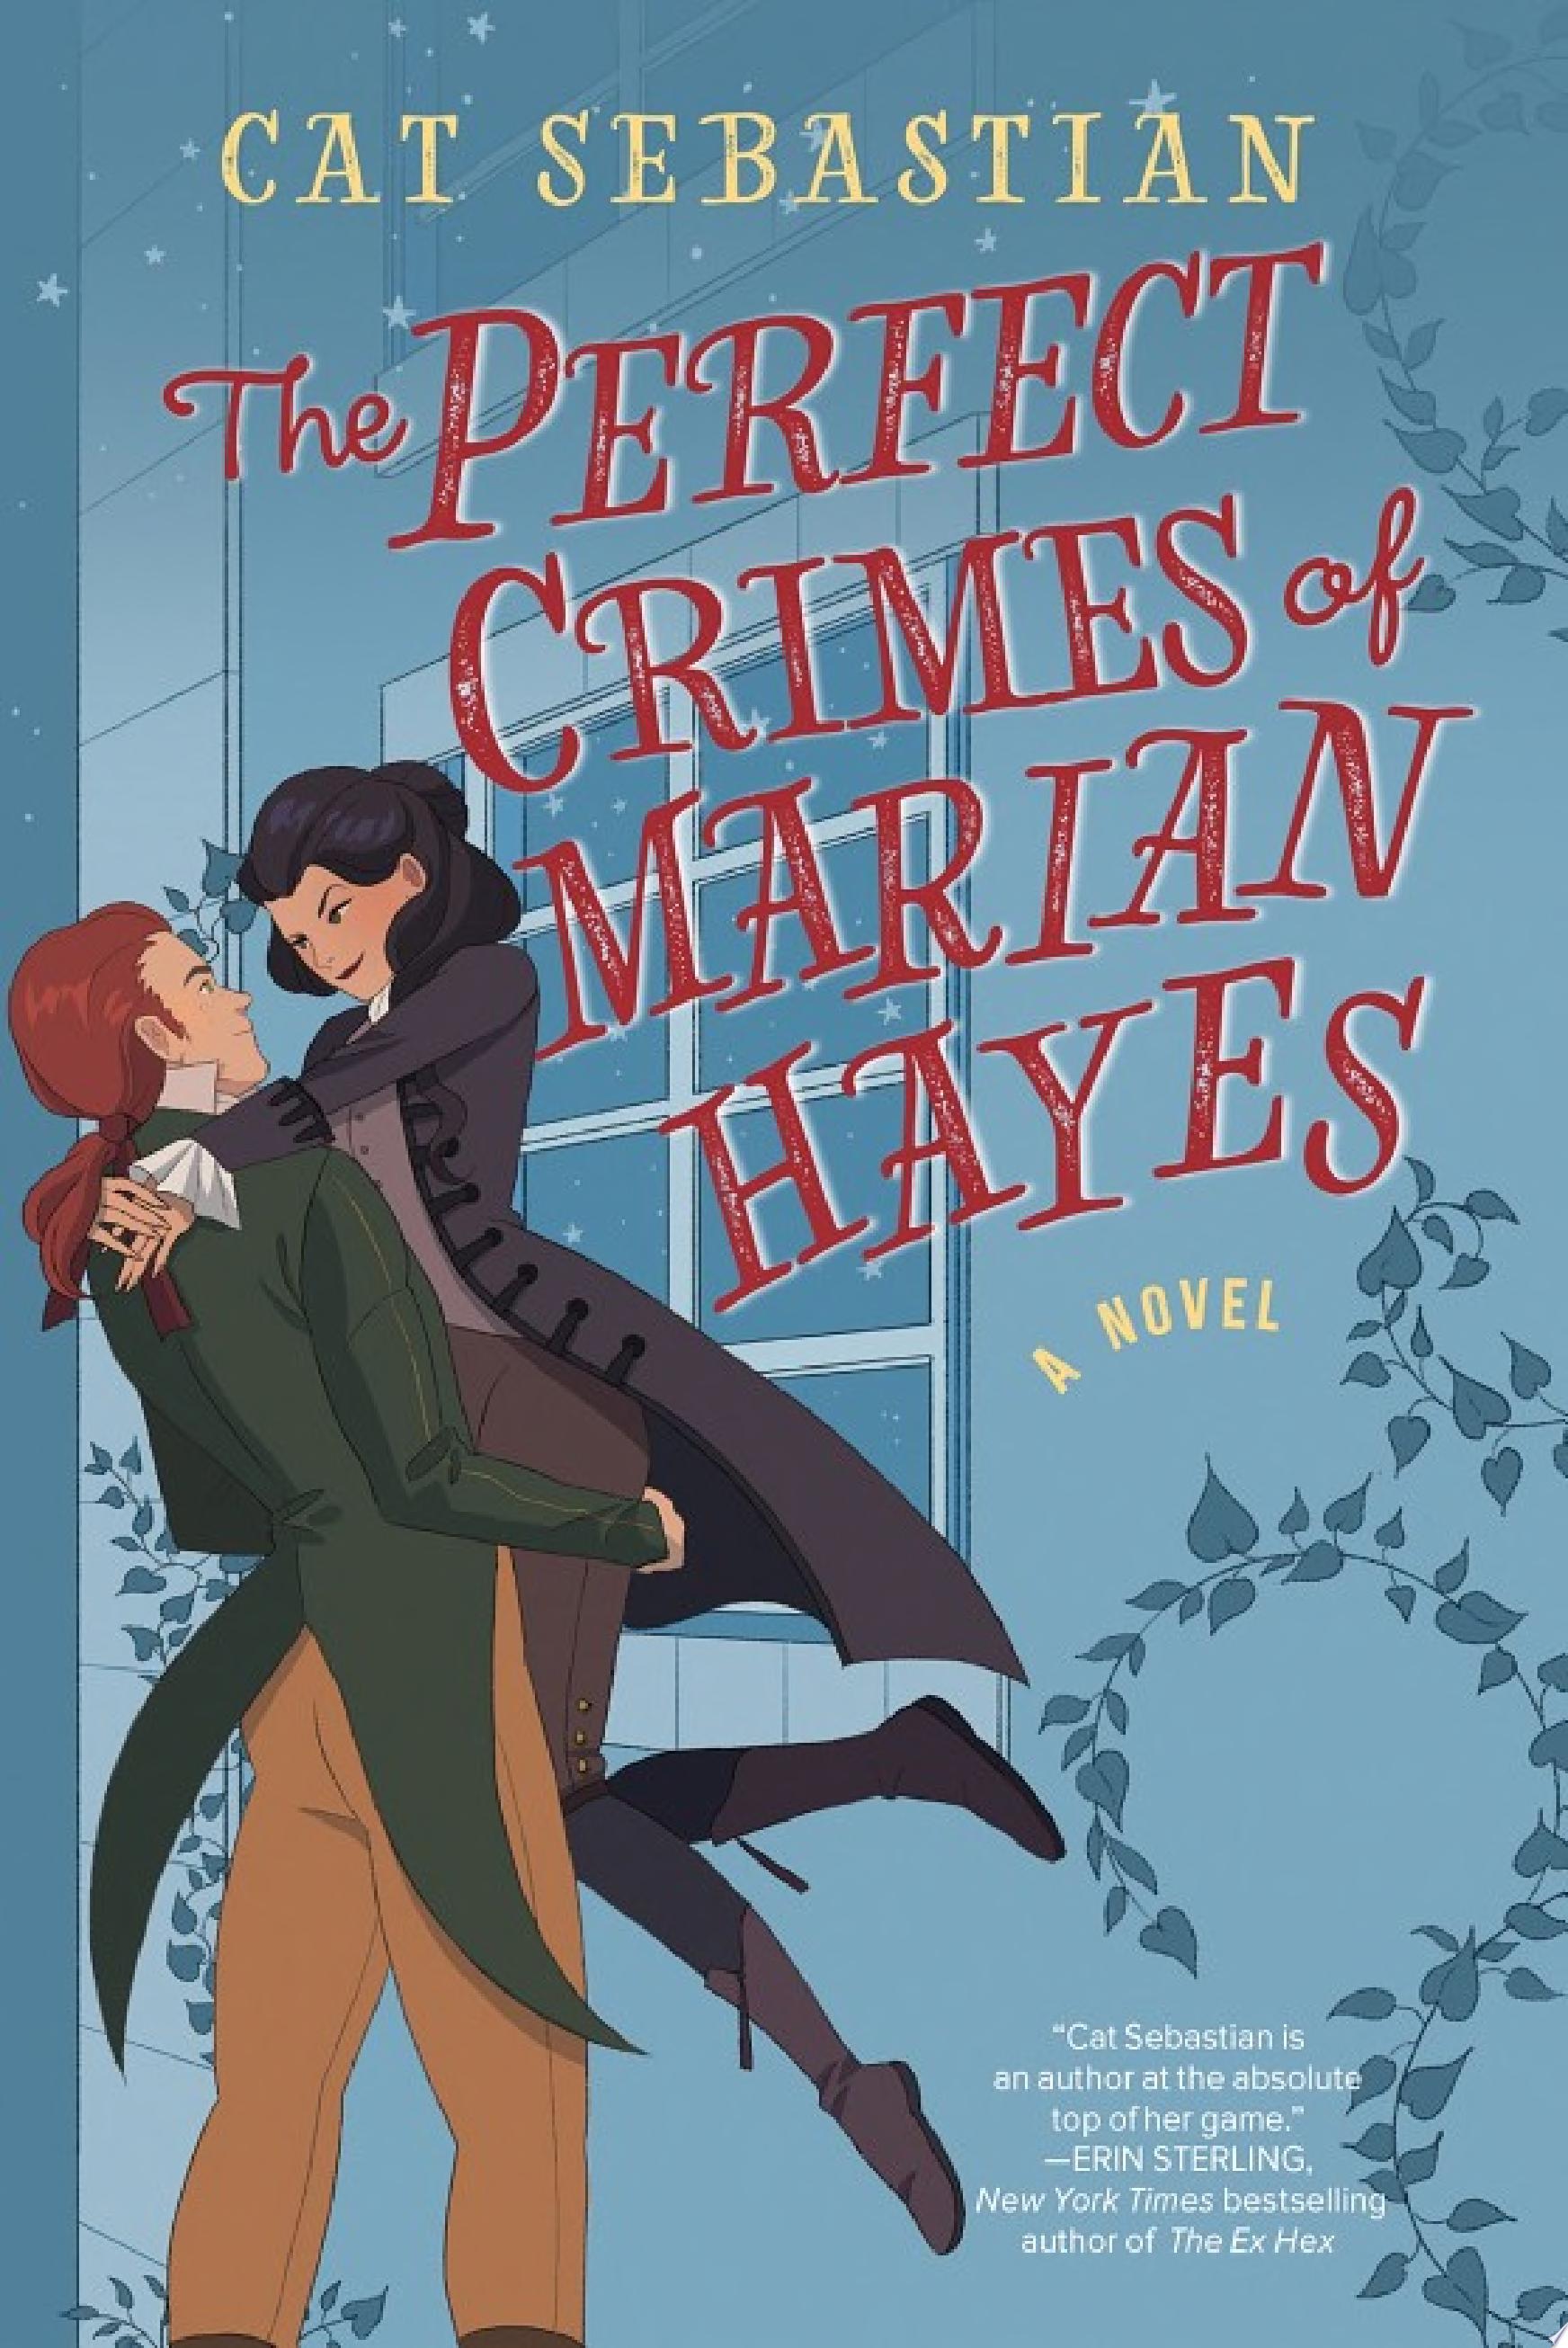 Image for "The Perfect Crimes of Marian Hayes"